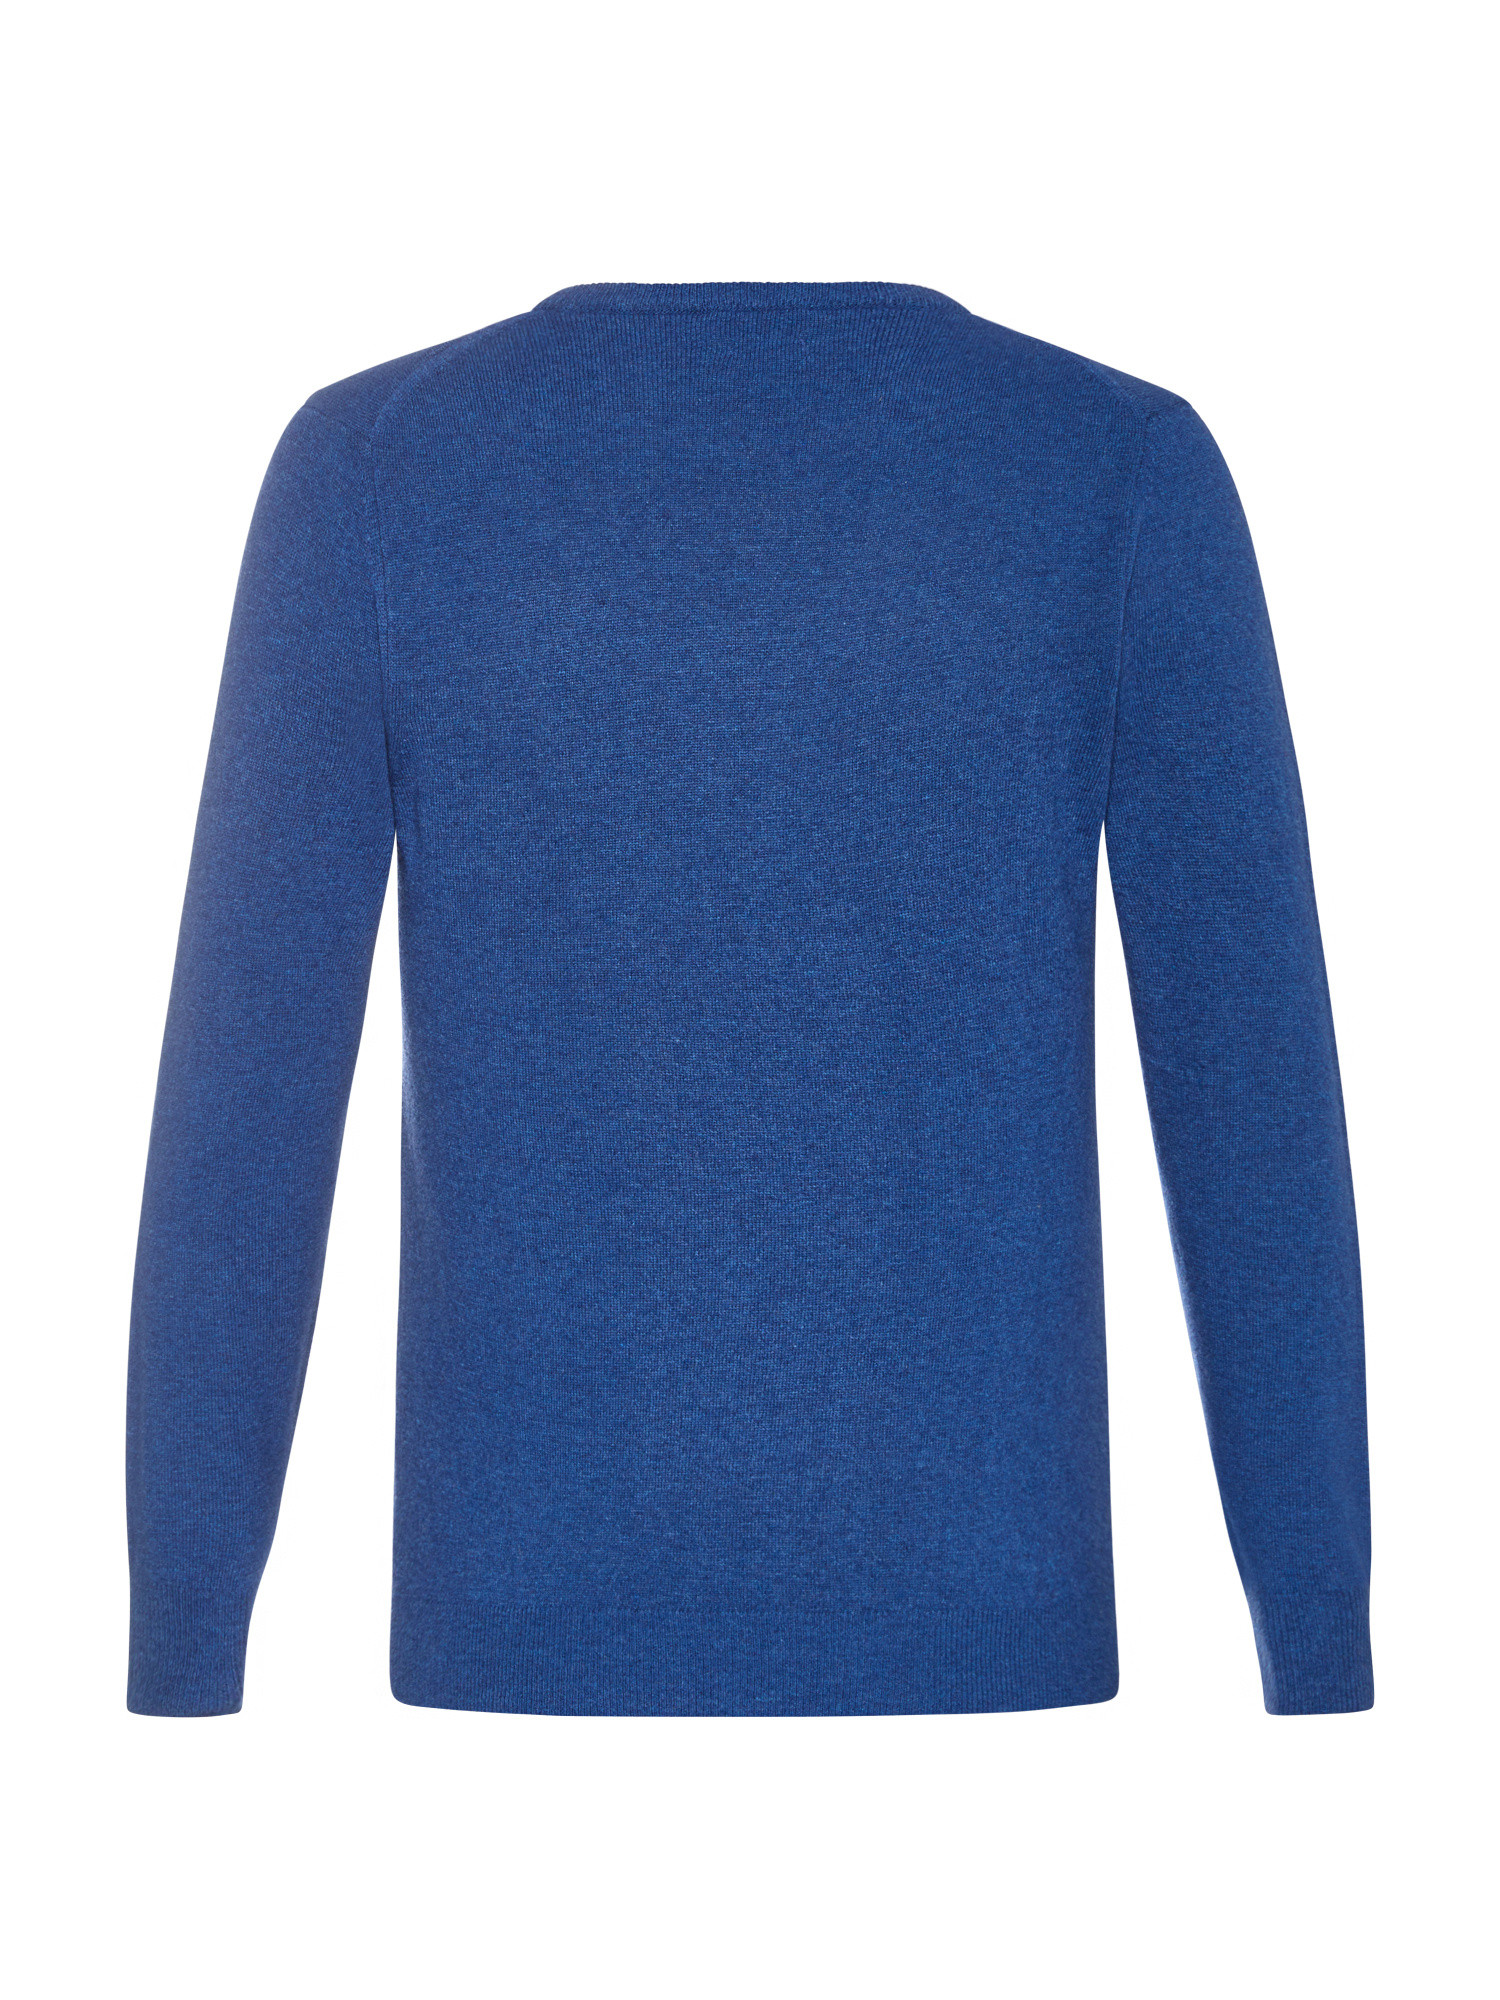 Luca D'Altieri - Cashmere Blend crew neck sweater with noble fibers, Aviation Blue, large image number 1